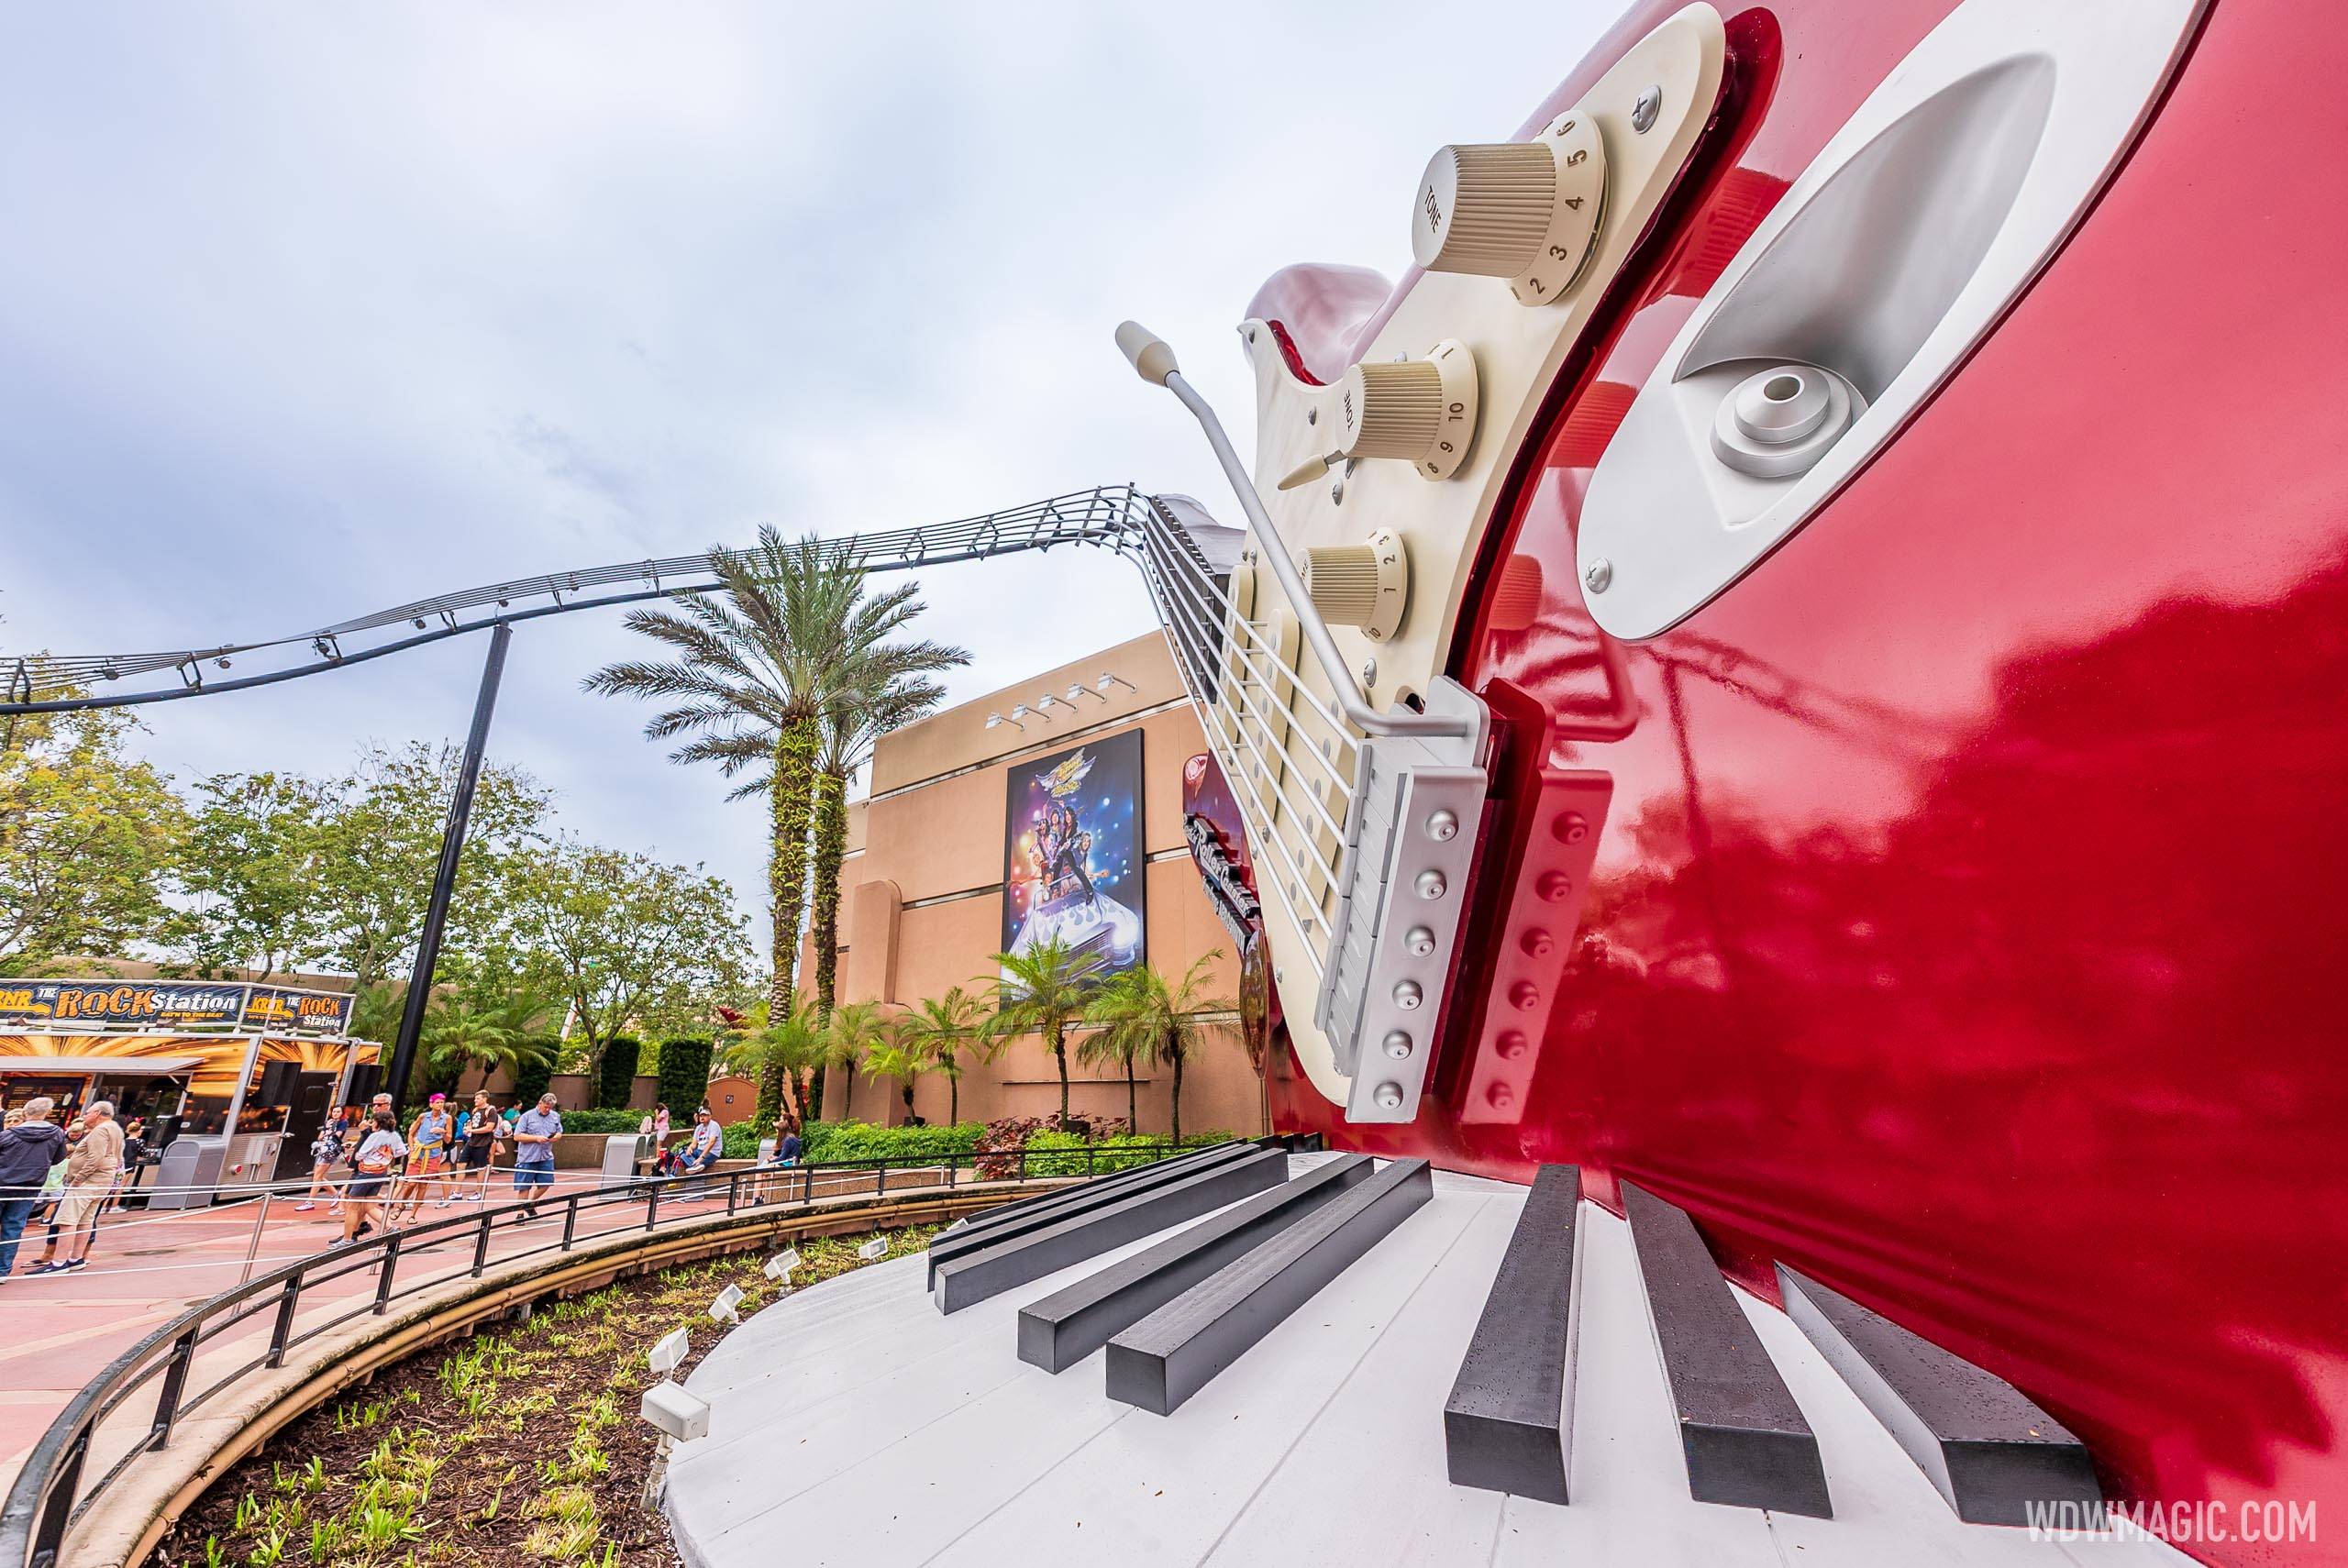 The hugely popular roller coaster ride at Disney's Hollywood Studios will close February 20 2023 to begin refurbishment